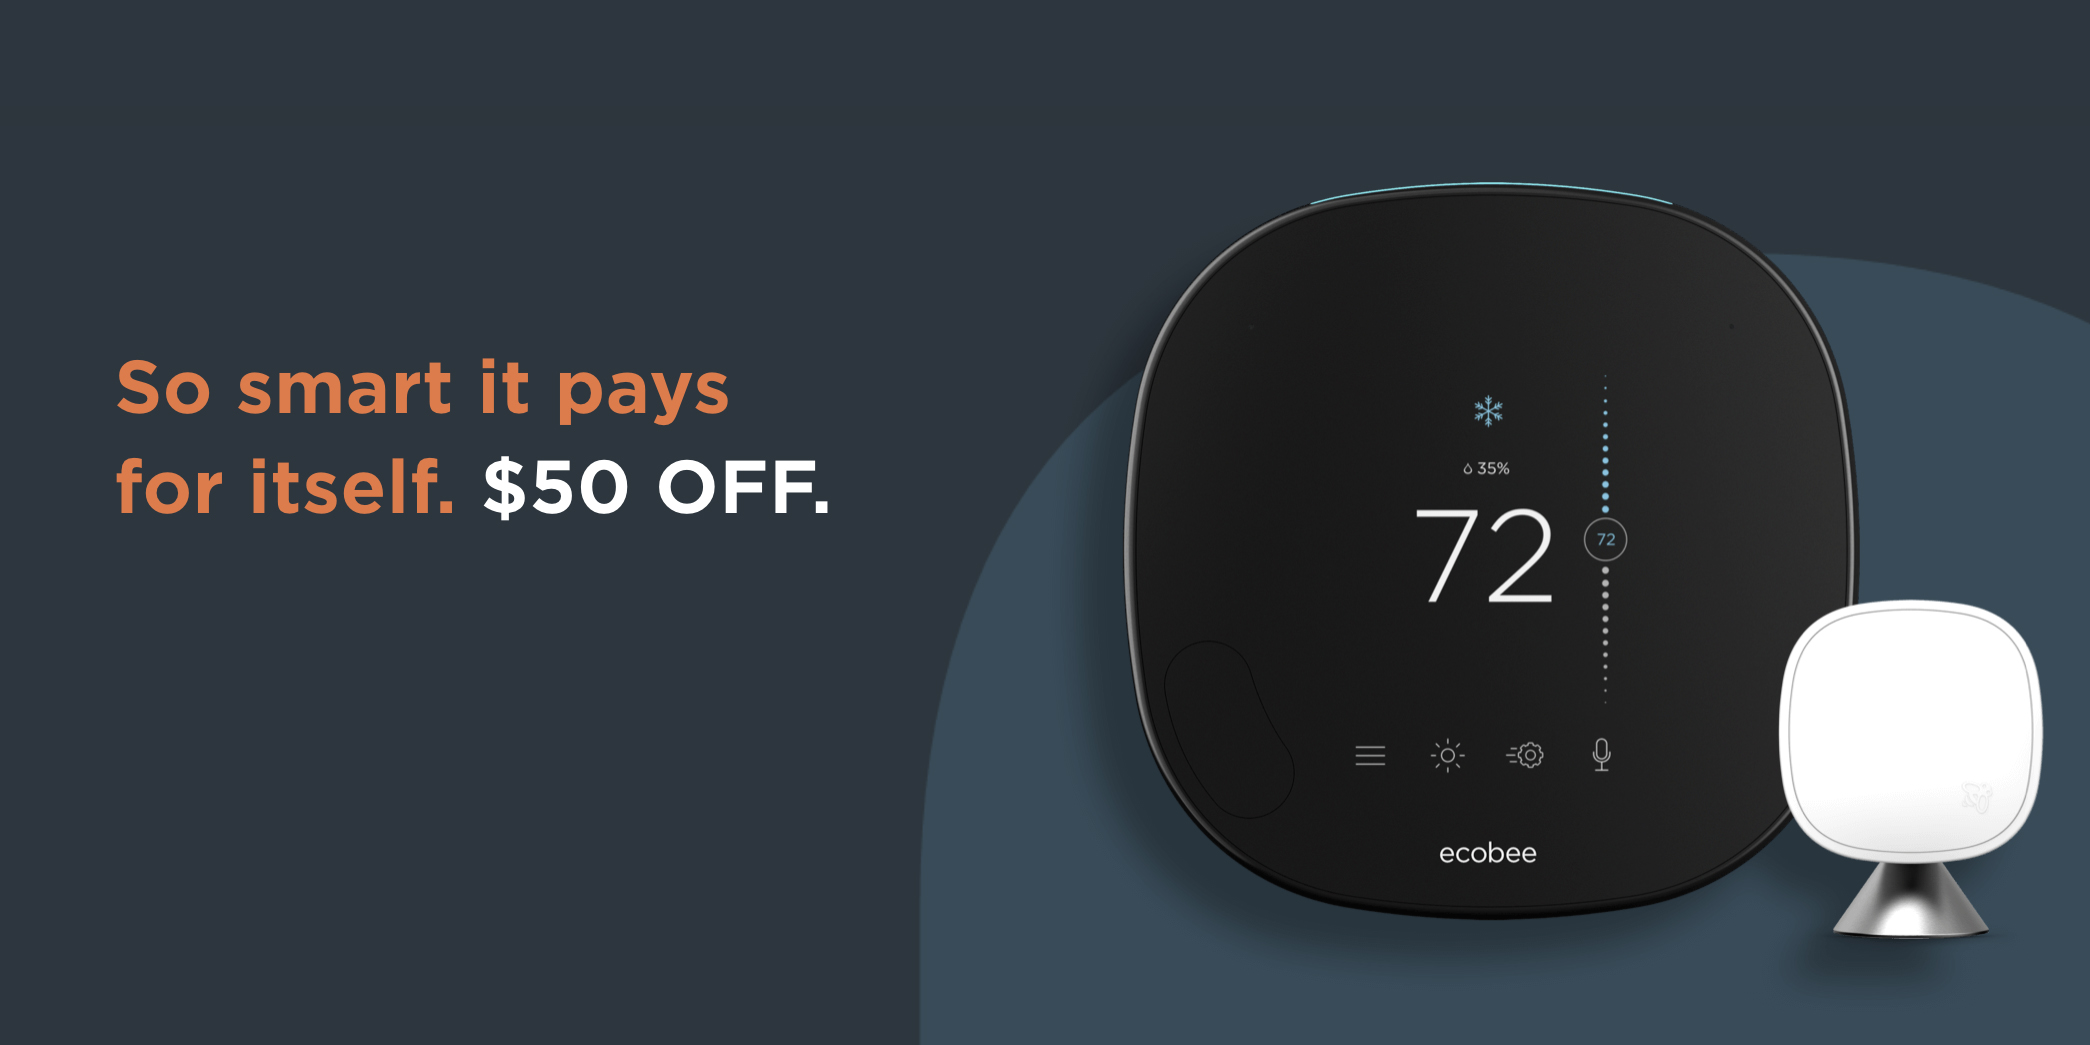 Black Friday pricing live for ecobee SmartThermostat at 199, more from